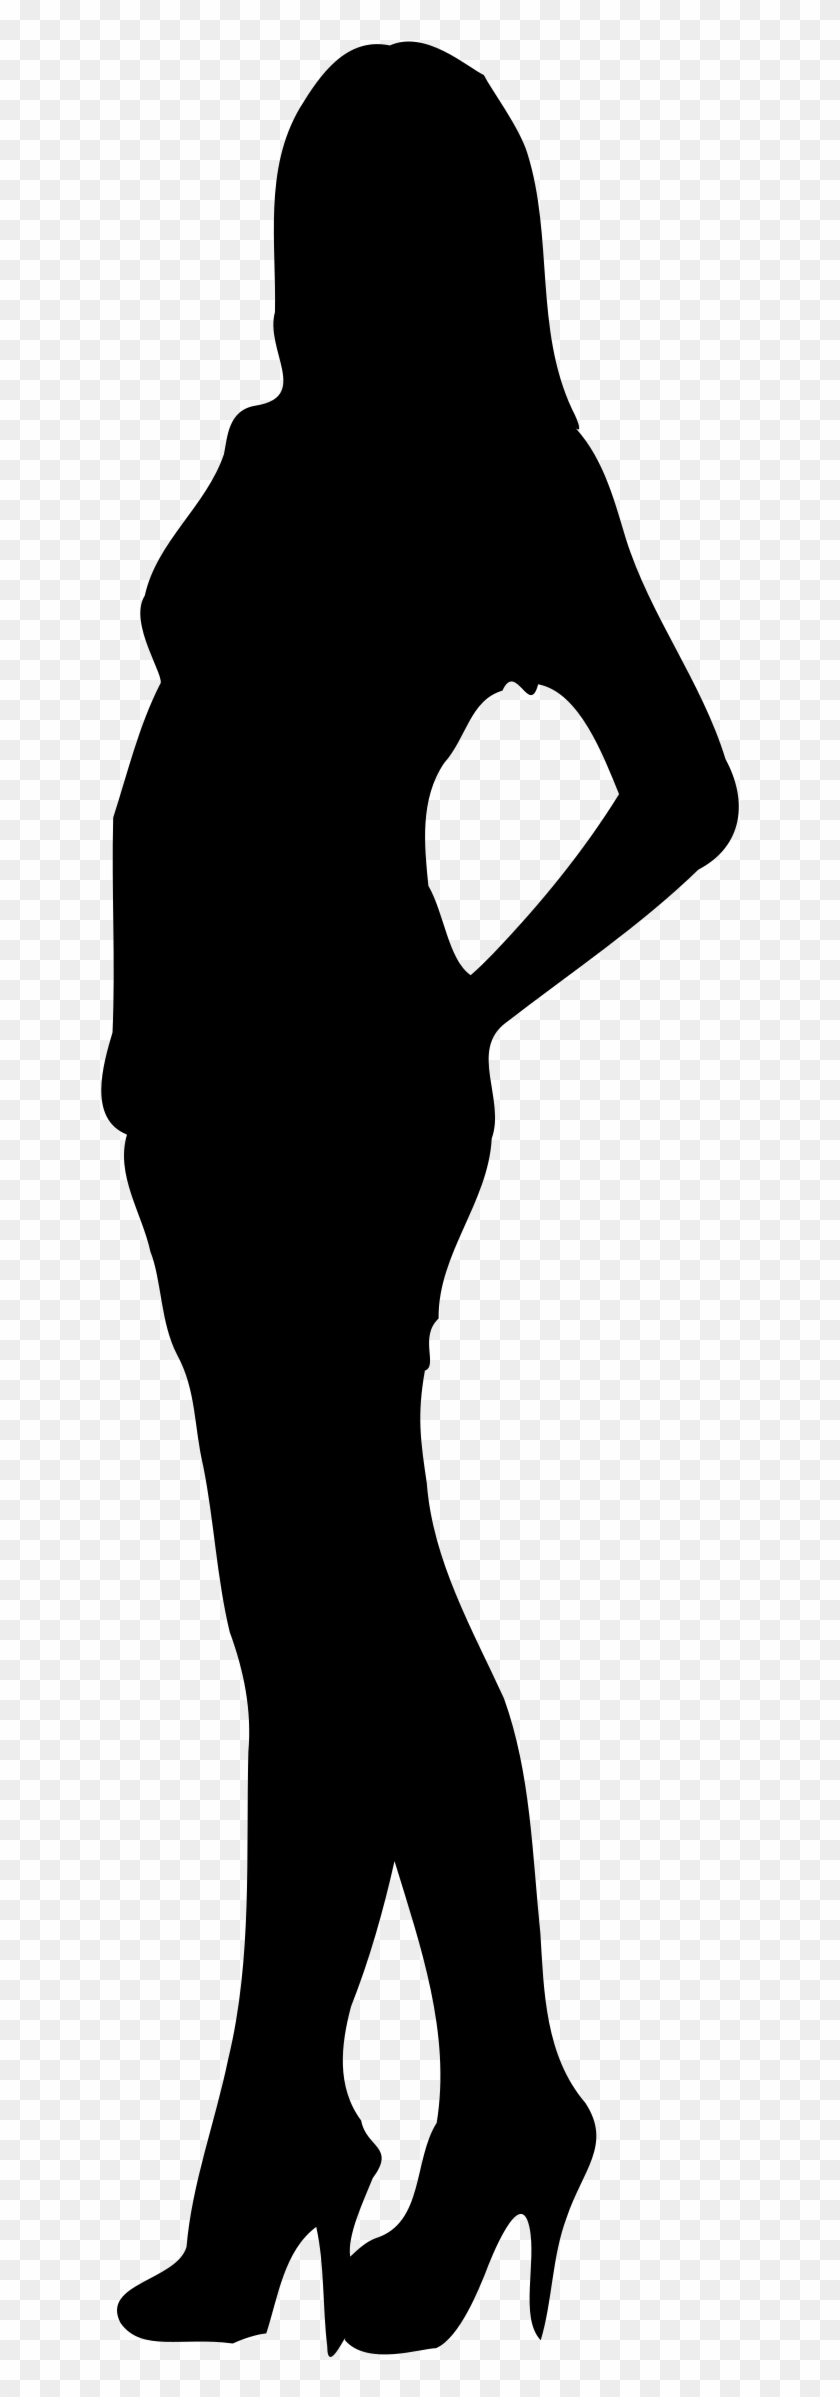 Woman Silhouette - Silhouette Looking At Phone #705817